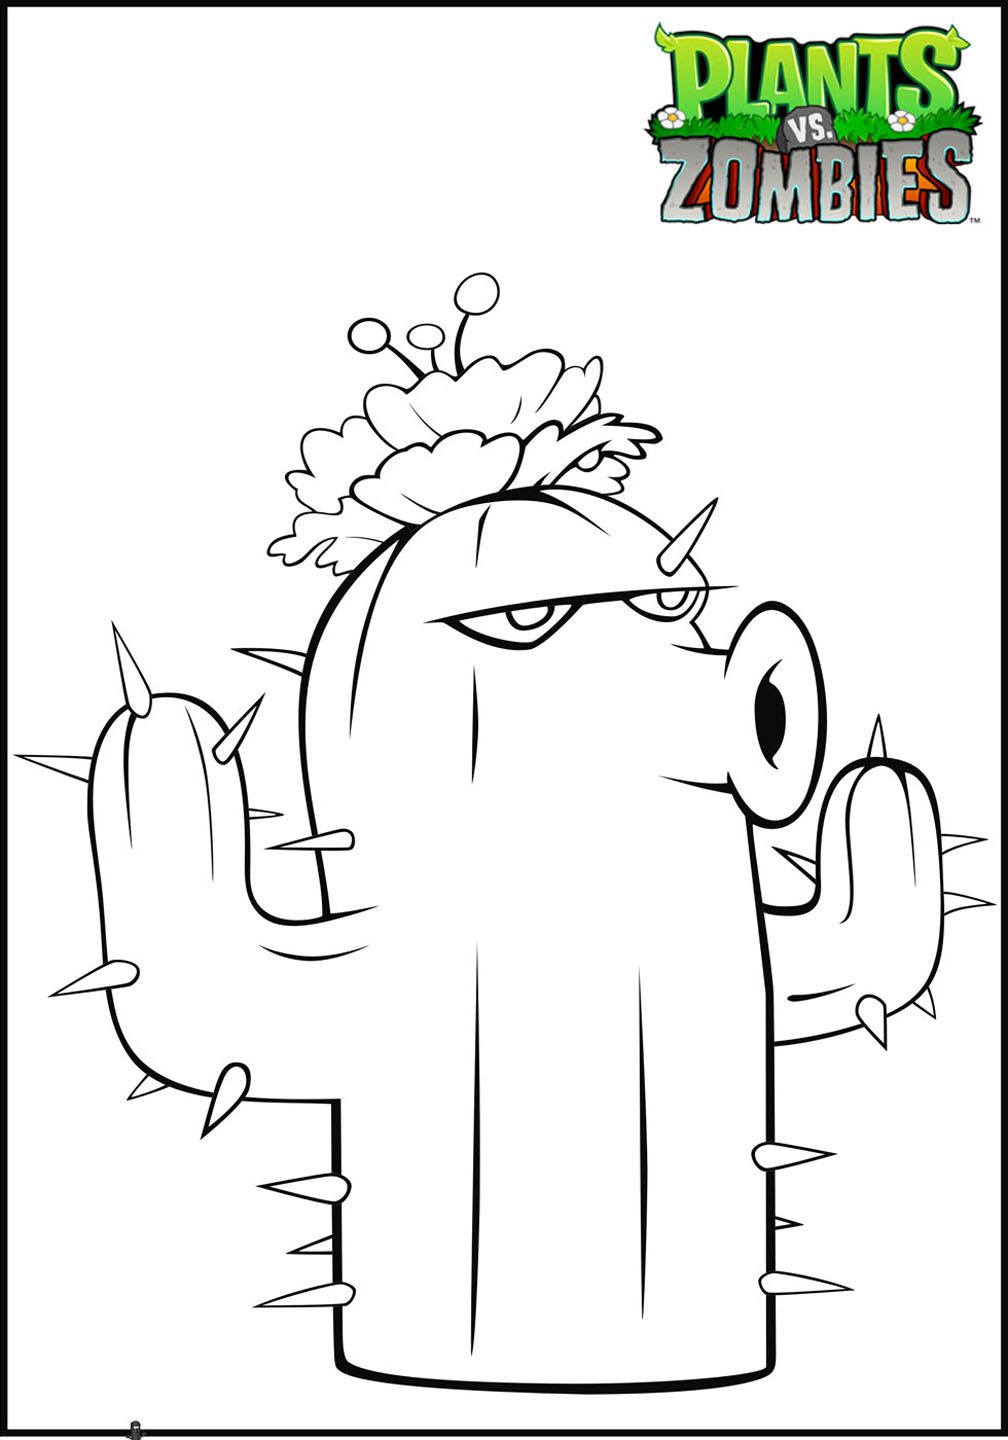 Plants vs zombie printable and colorable image